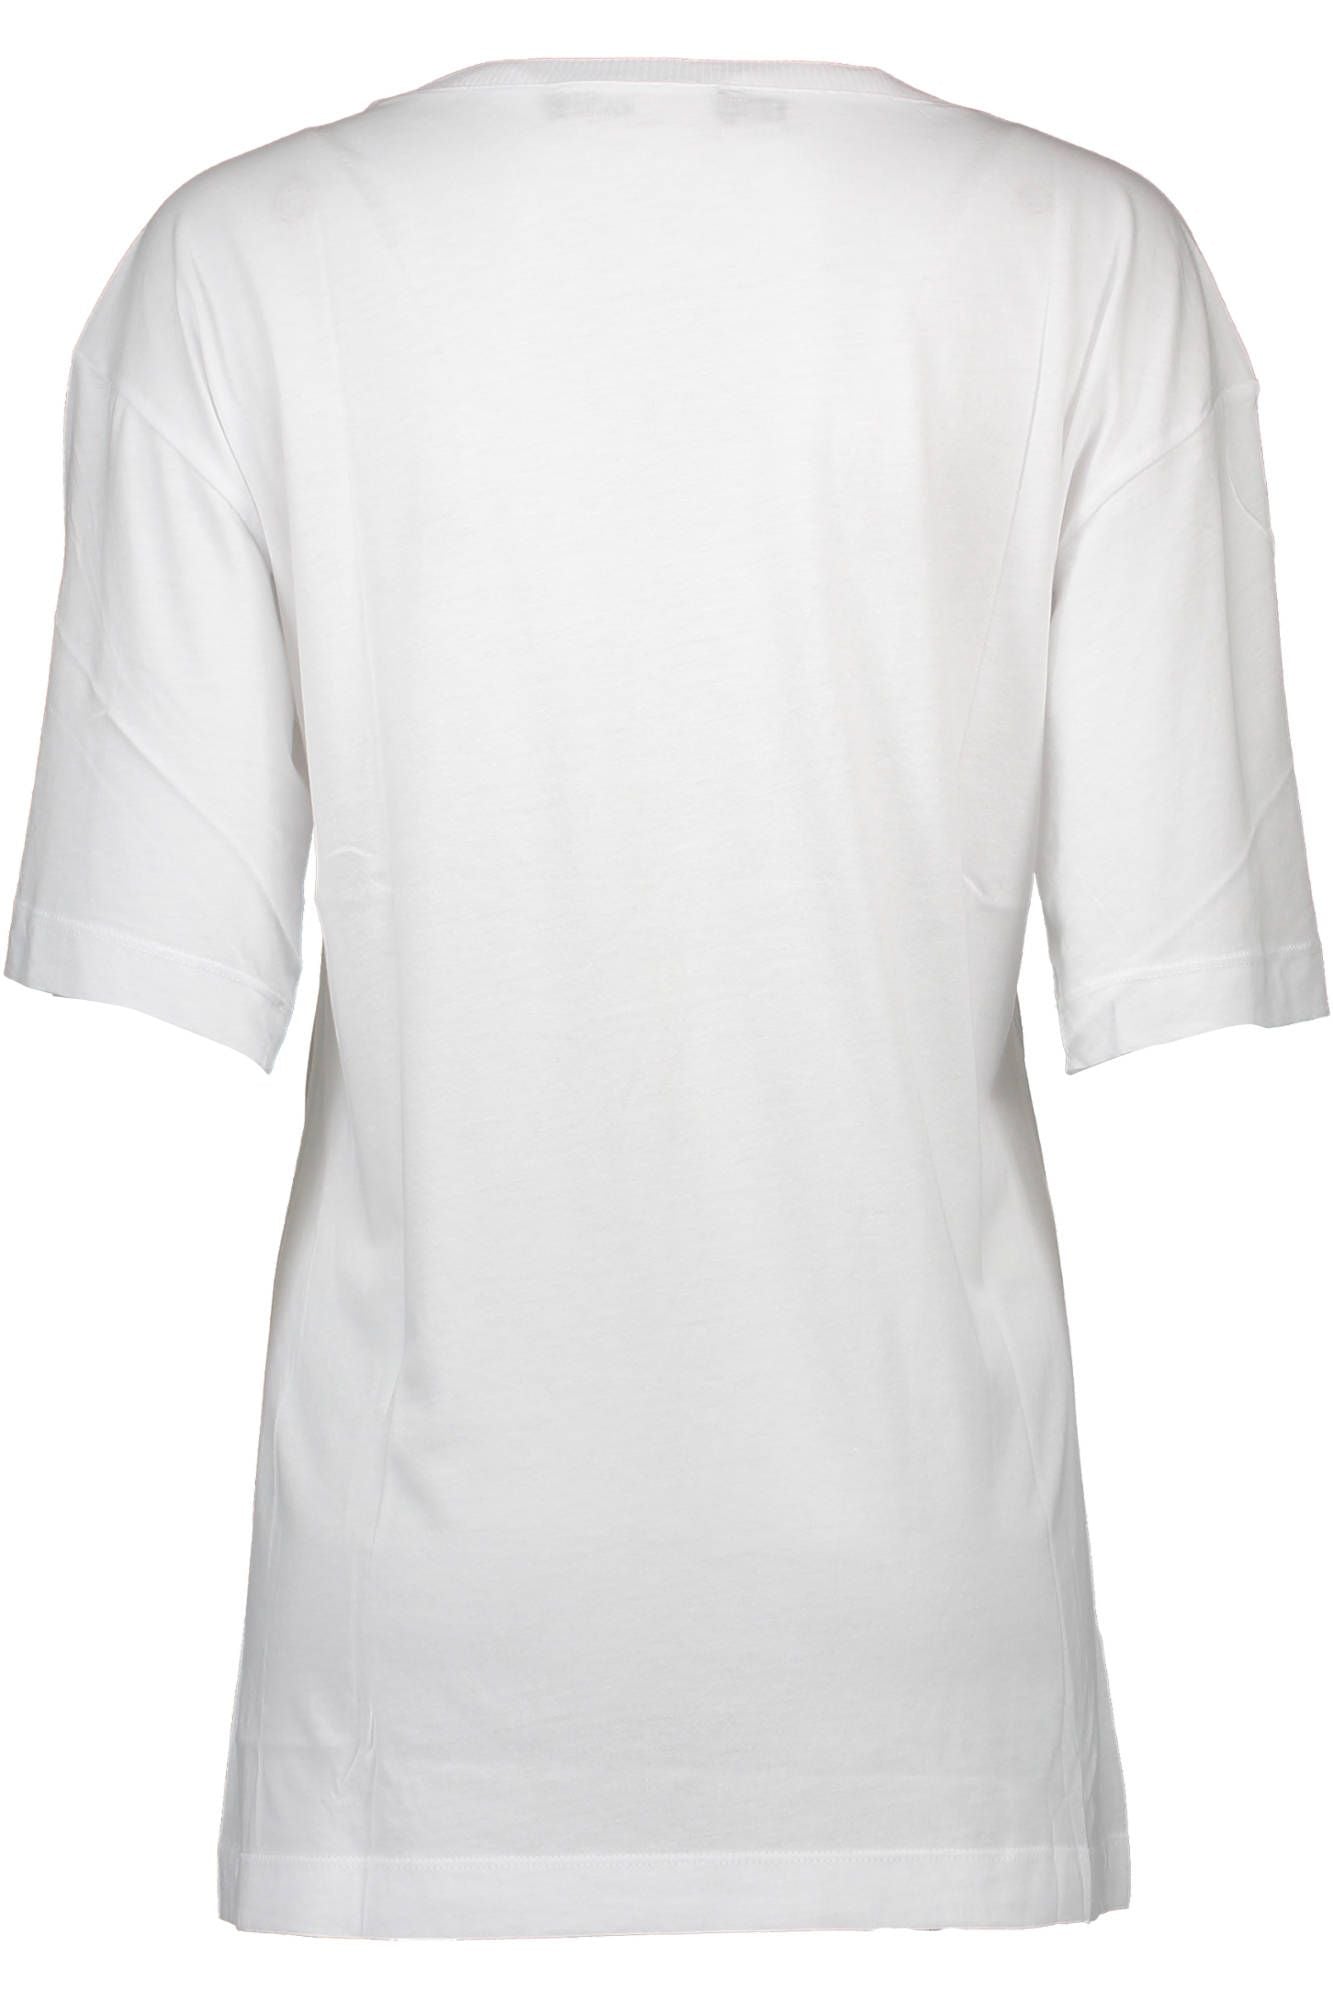 Chic White Logo Print Tee with Short Sleeves